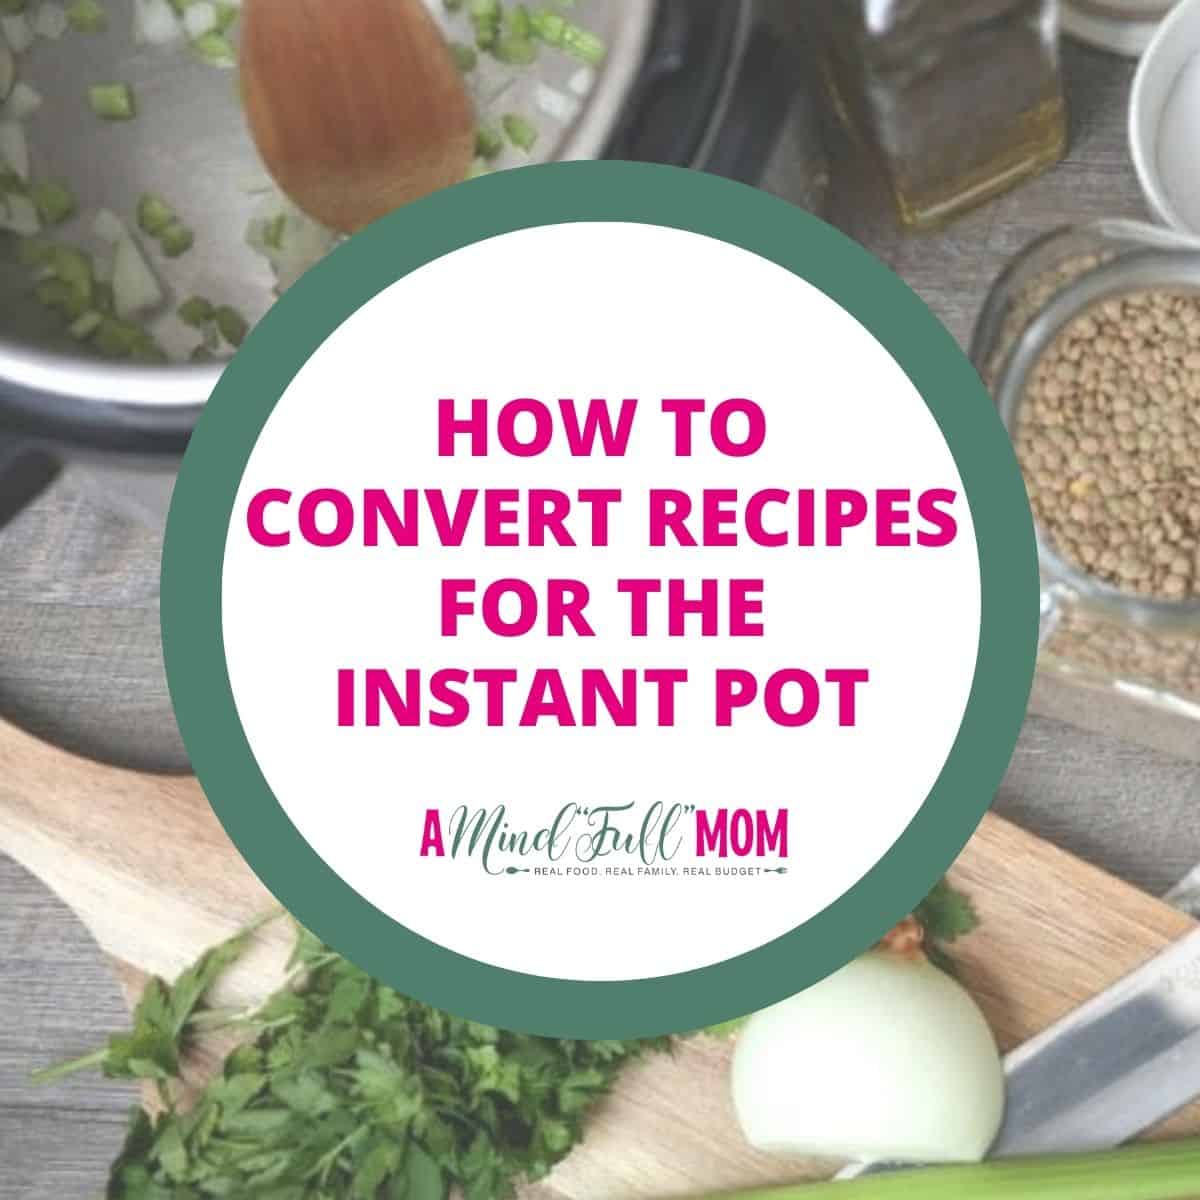 https://amindfullmom.com/wp-content/uploads/2023/12/How-To-Convert-Recipes-for-the-Instant-Pot.jpg